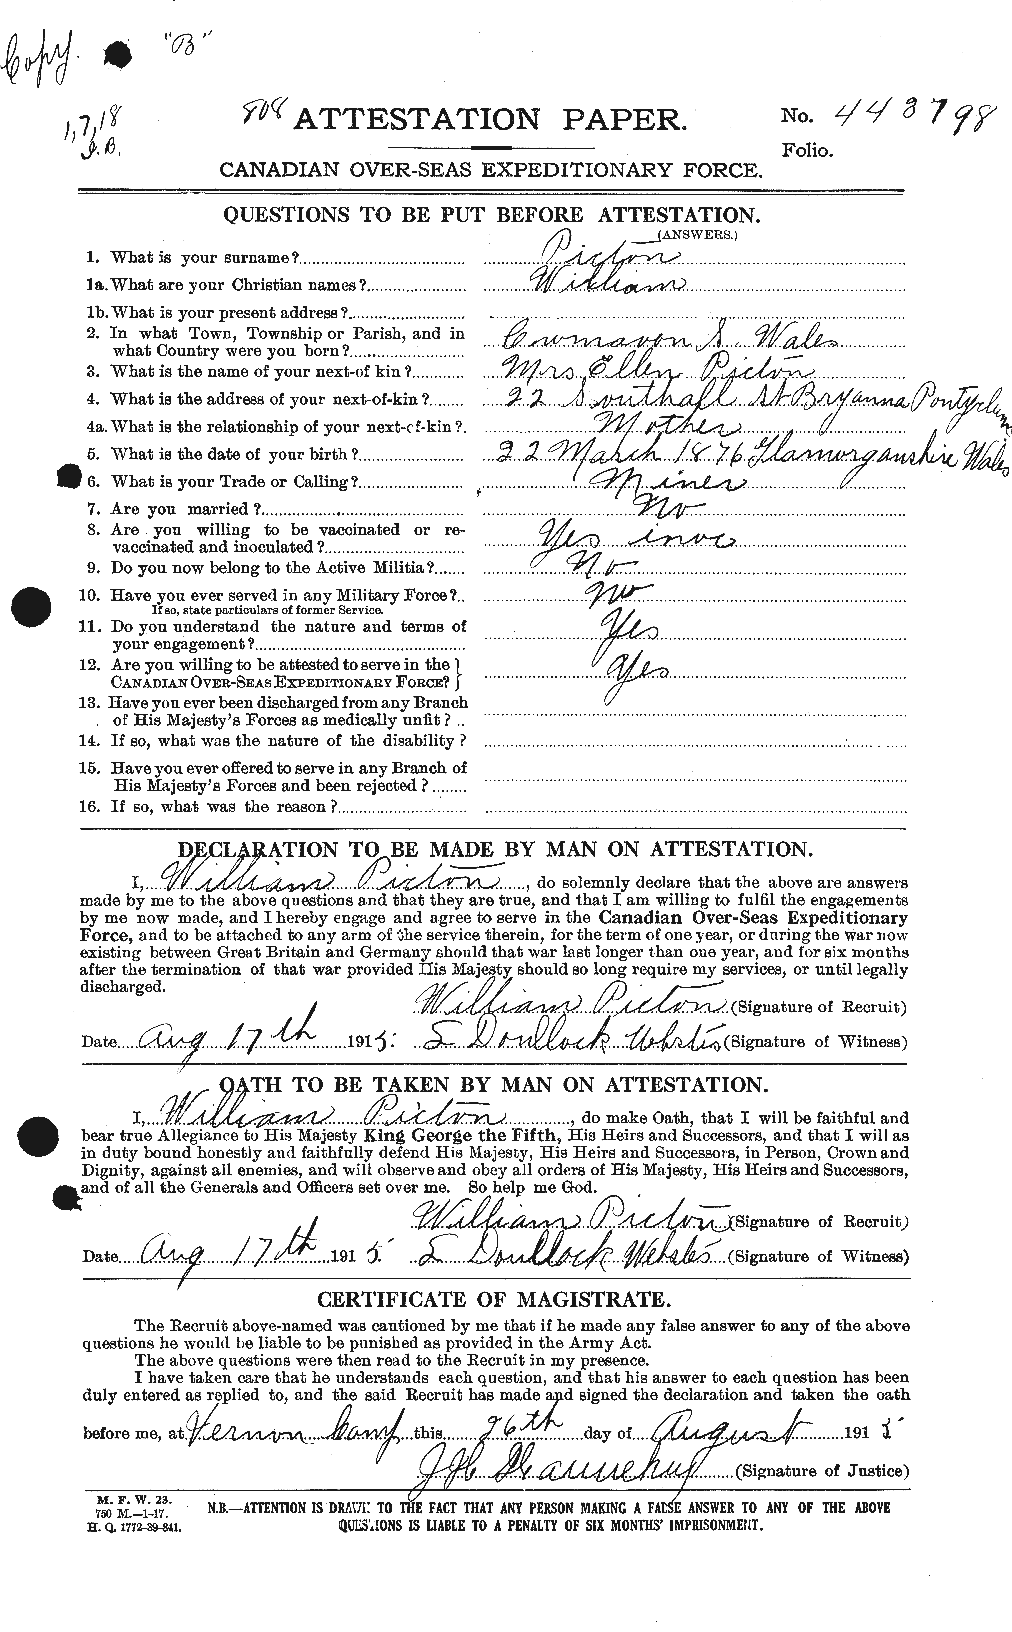 Personnel Records of the First World War - CEF 579812a